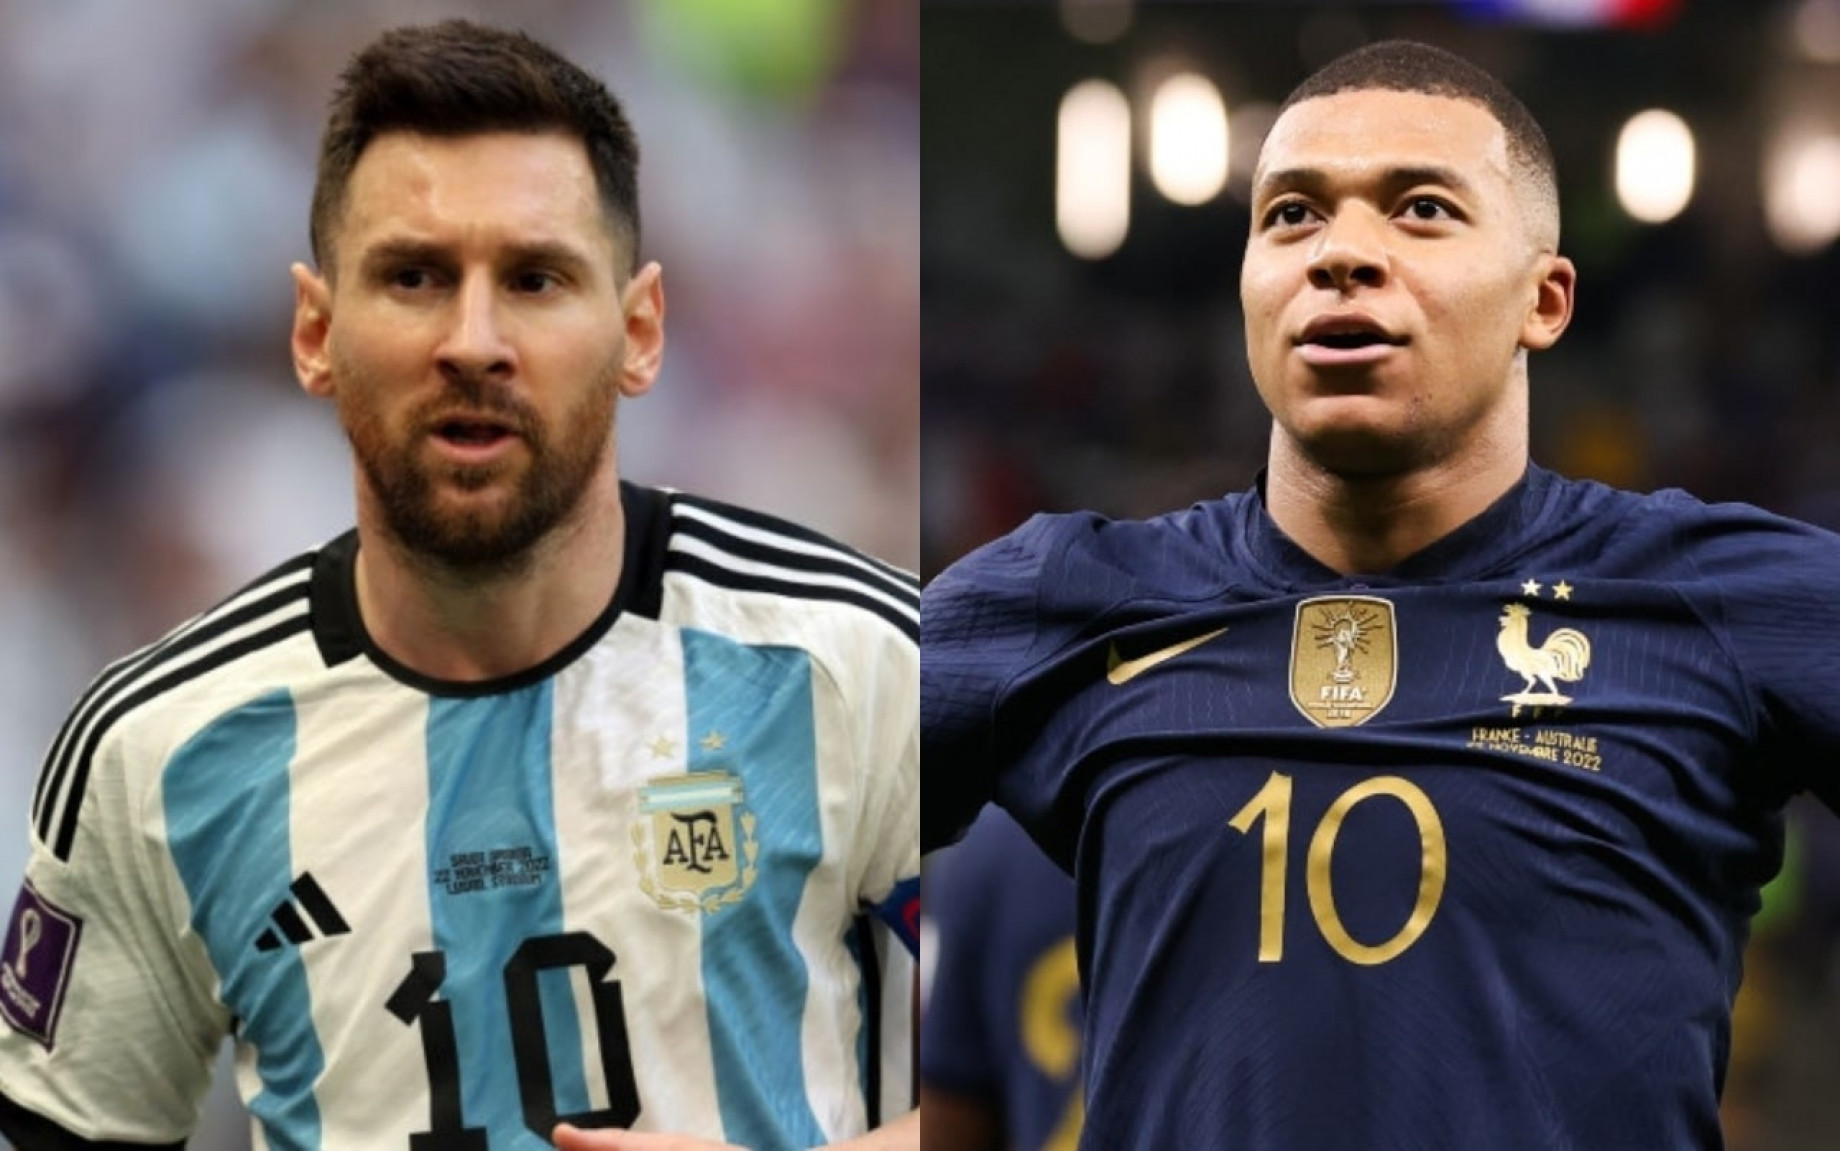 messi-mbappe-collage-gpo.jpg